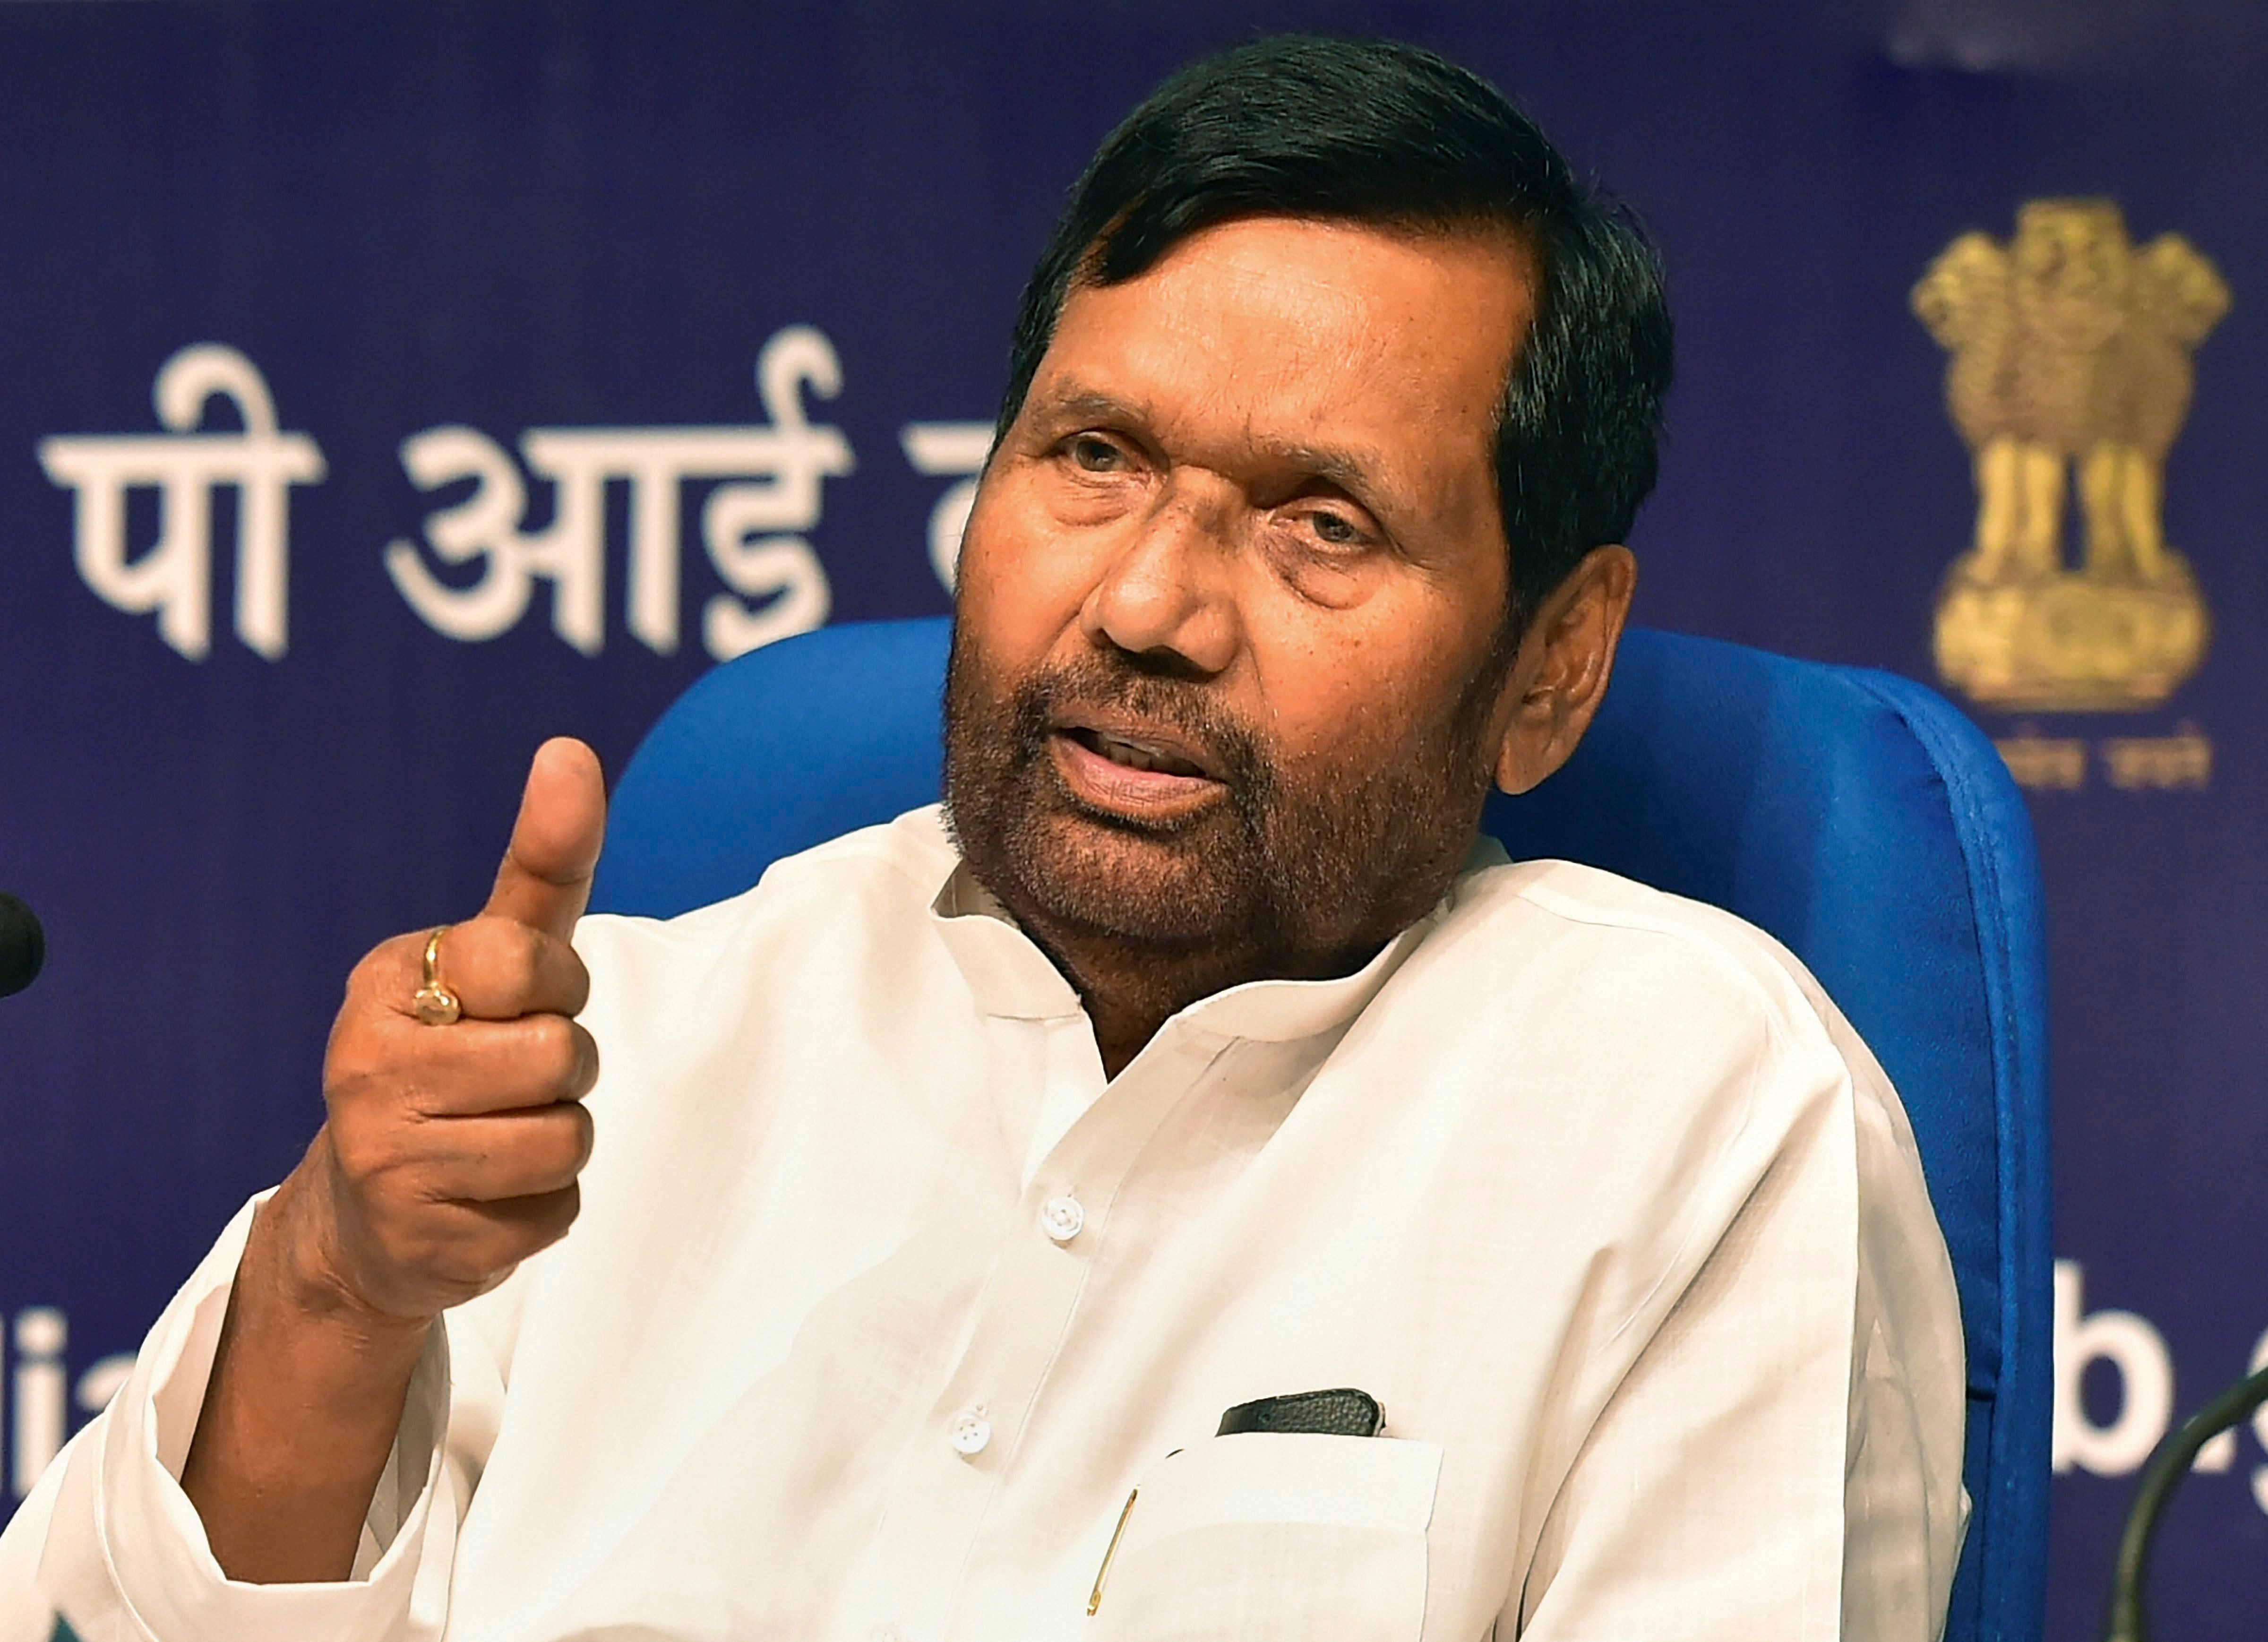 Paswan also hailed Prime Minister Narendra Modi for the quick passage of the Scheduled Castes and Scheduled Tribes (Prevention of Atrocities) Bill in Parliament to address concerns of Dalits and tribals.